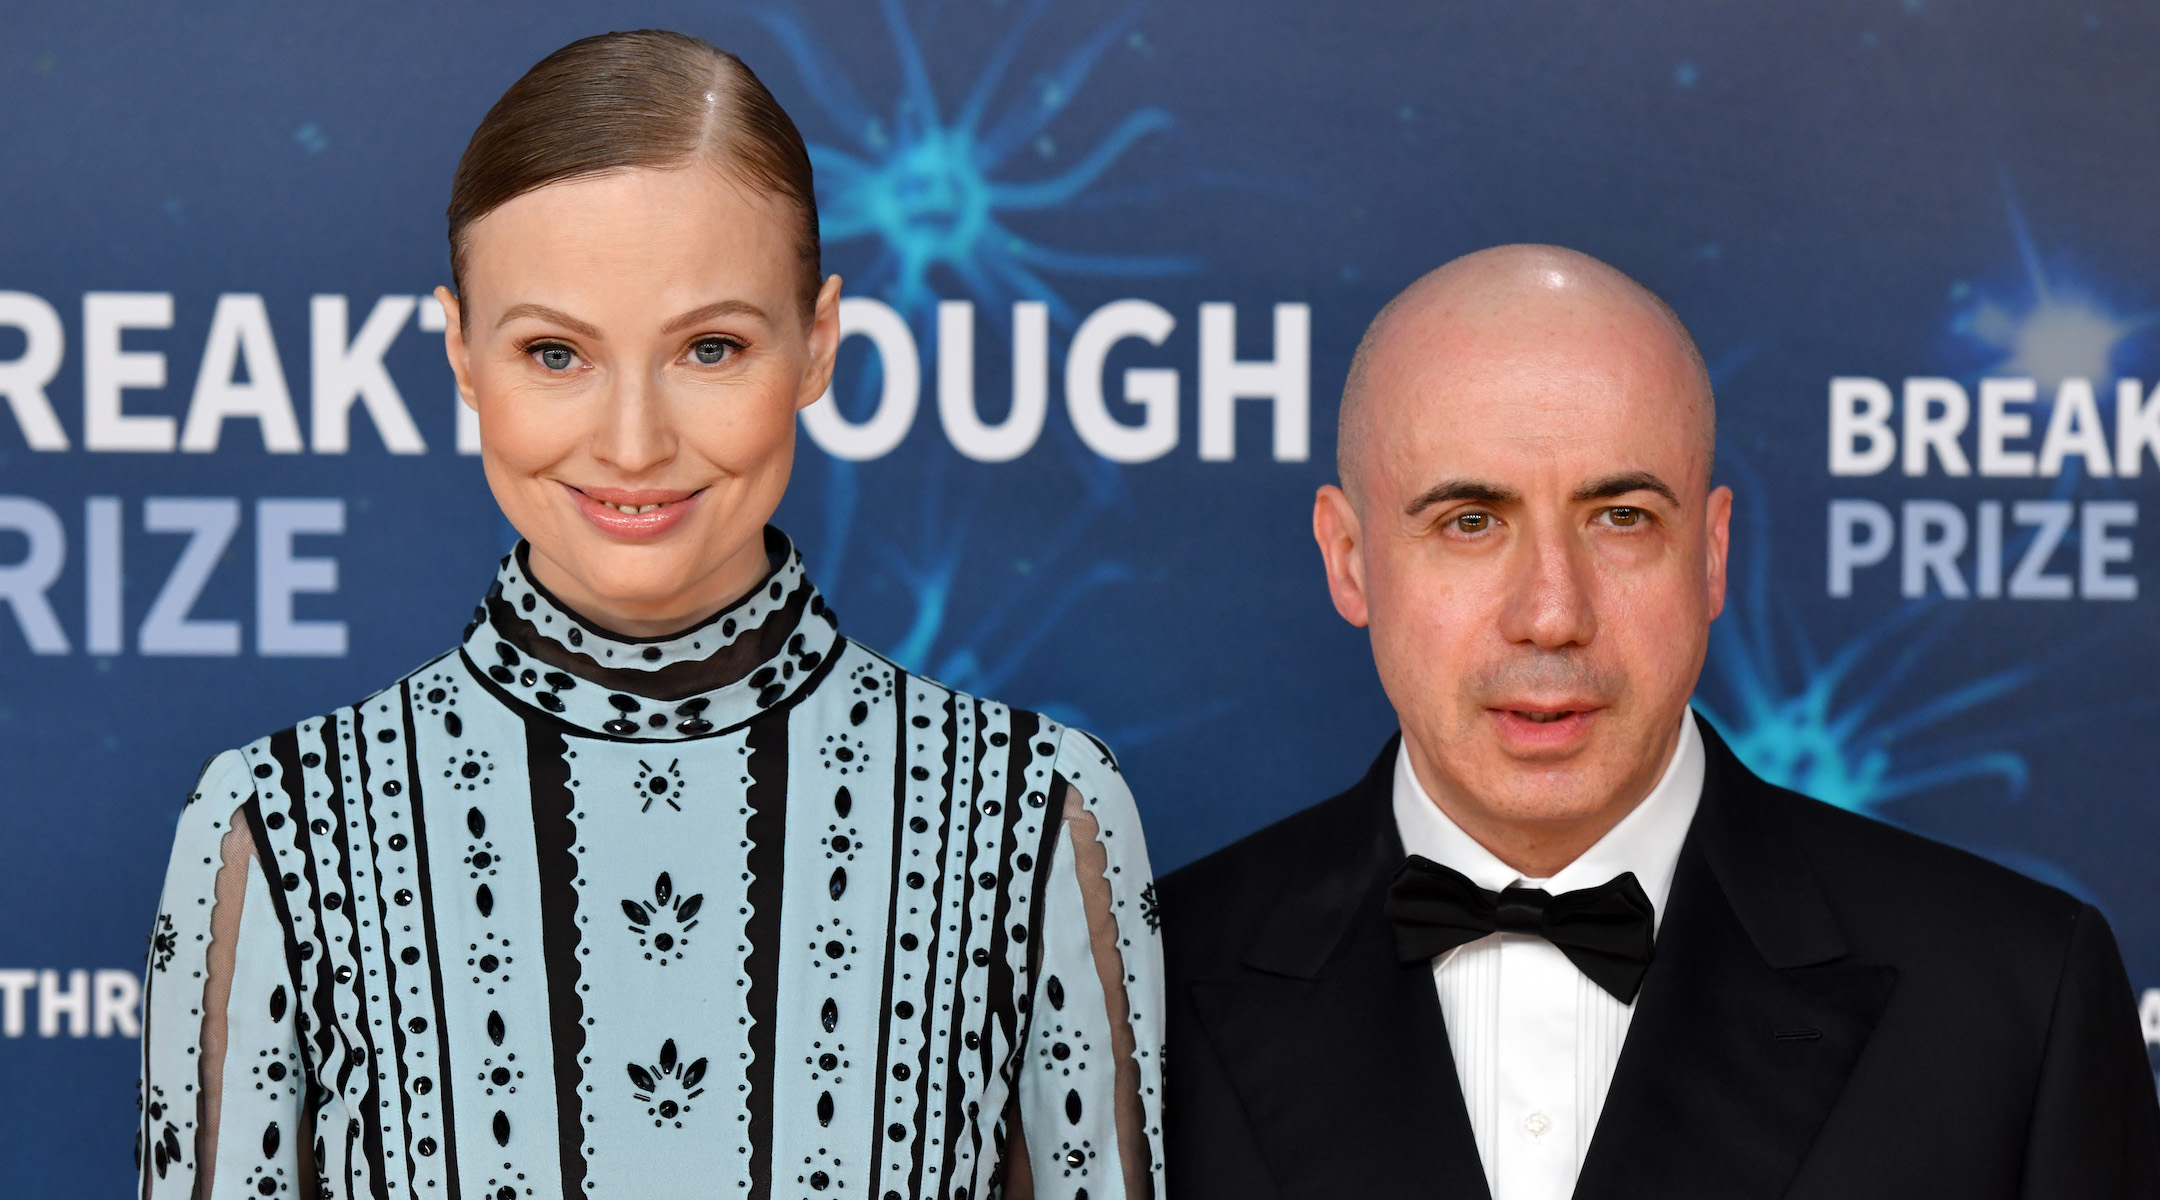 Julia Milner and Yuri Milner attend the 2020 Breakthrough Prize Red Carpet at NASA Ames Research Center in Mountain View, California, Nov. 3, 2019. (Ian Tuttle/Getty Images for Breakthrough Prize)